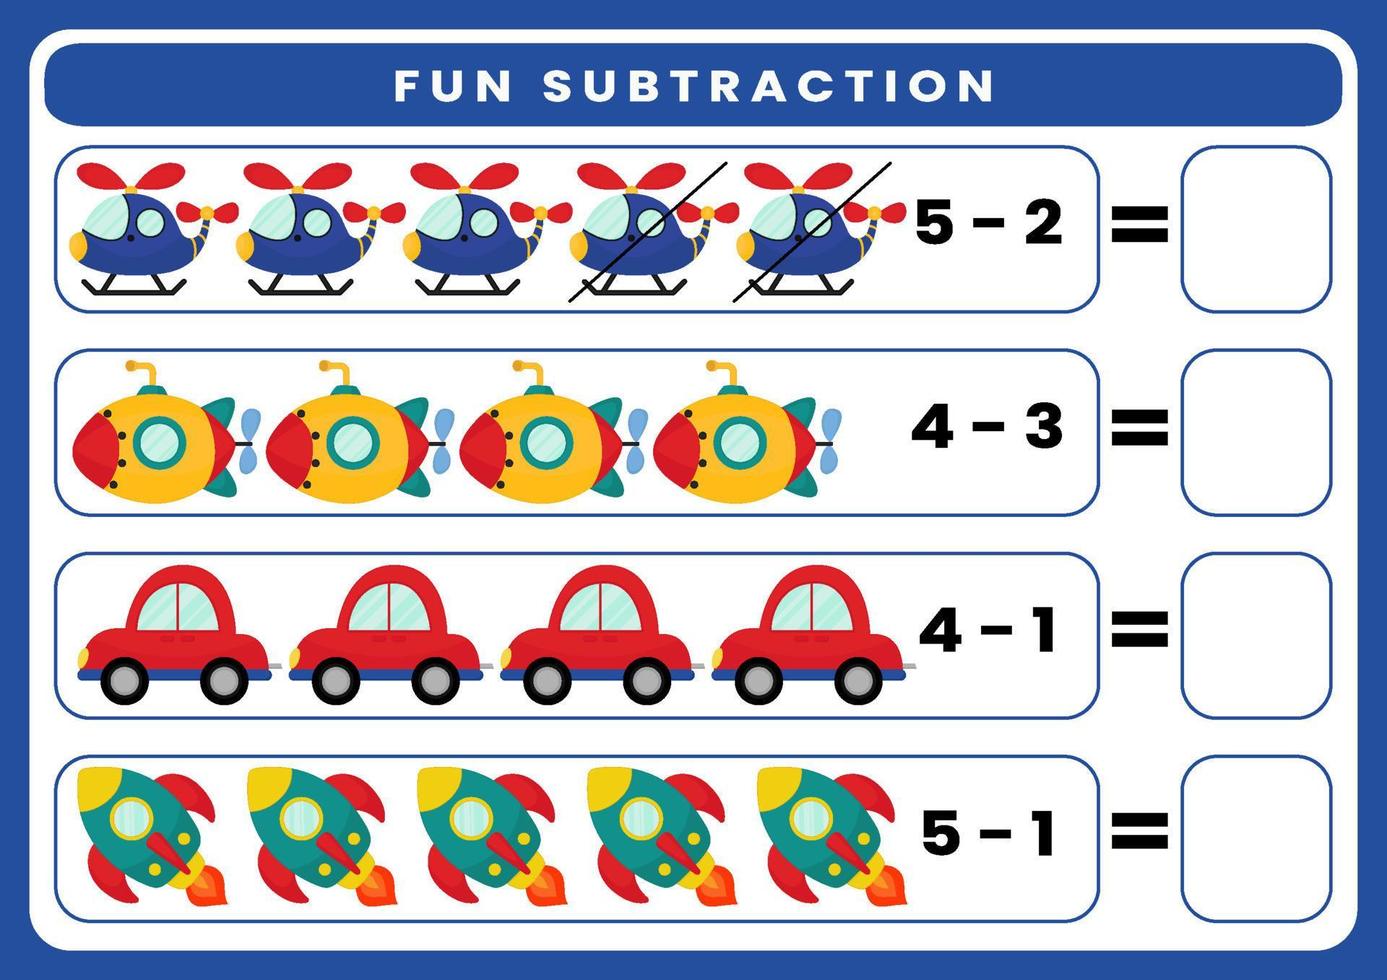 Education game for children fun subtraction by counting cute cartoon transportation. Printable worksheet vector